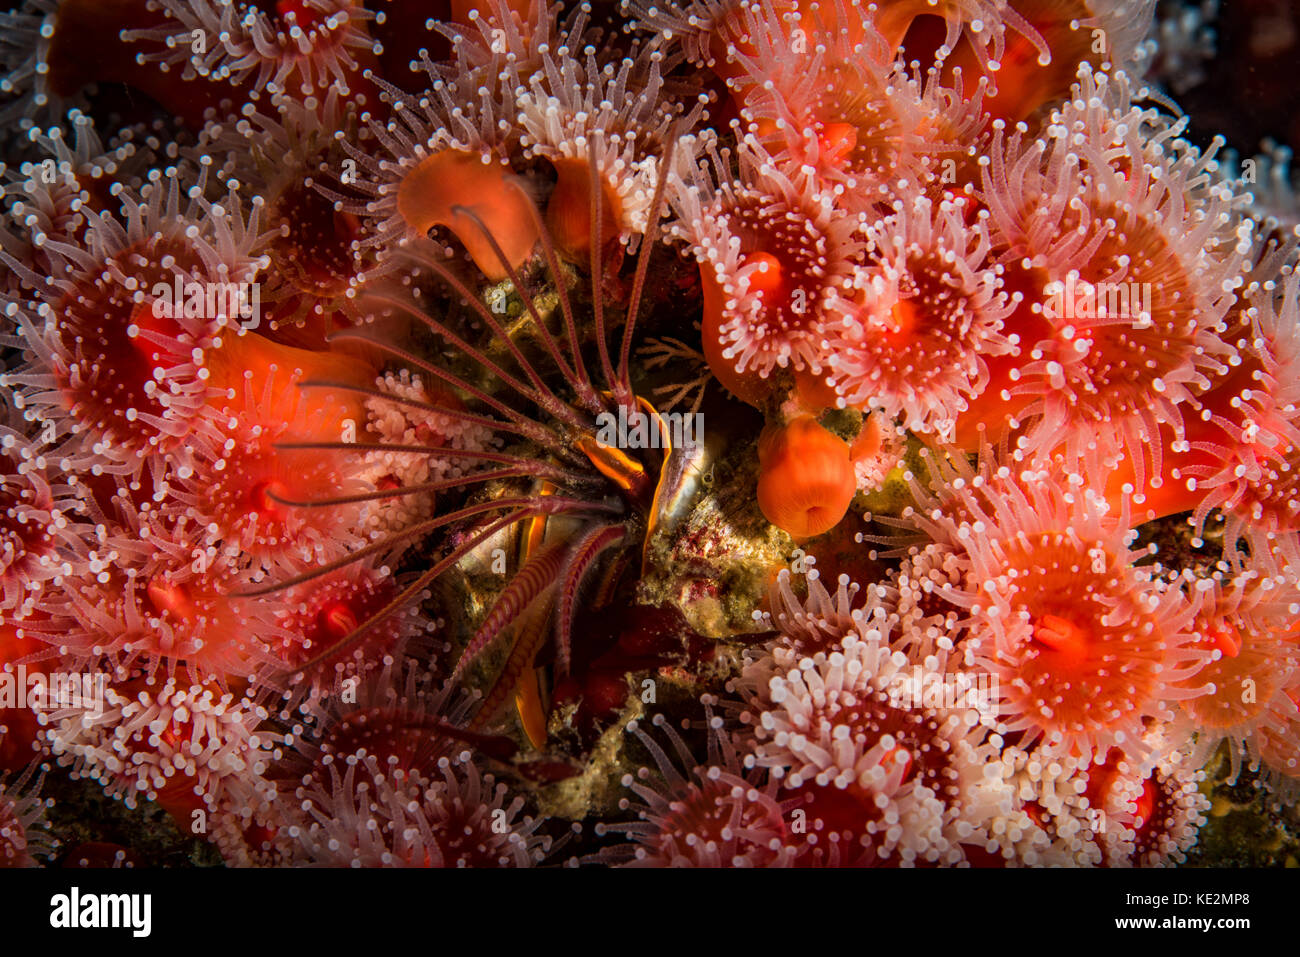 Strawberry anemones surround a barnacle, Monterey, Central California. Stock Photo